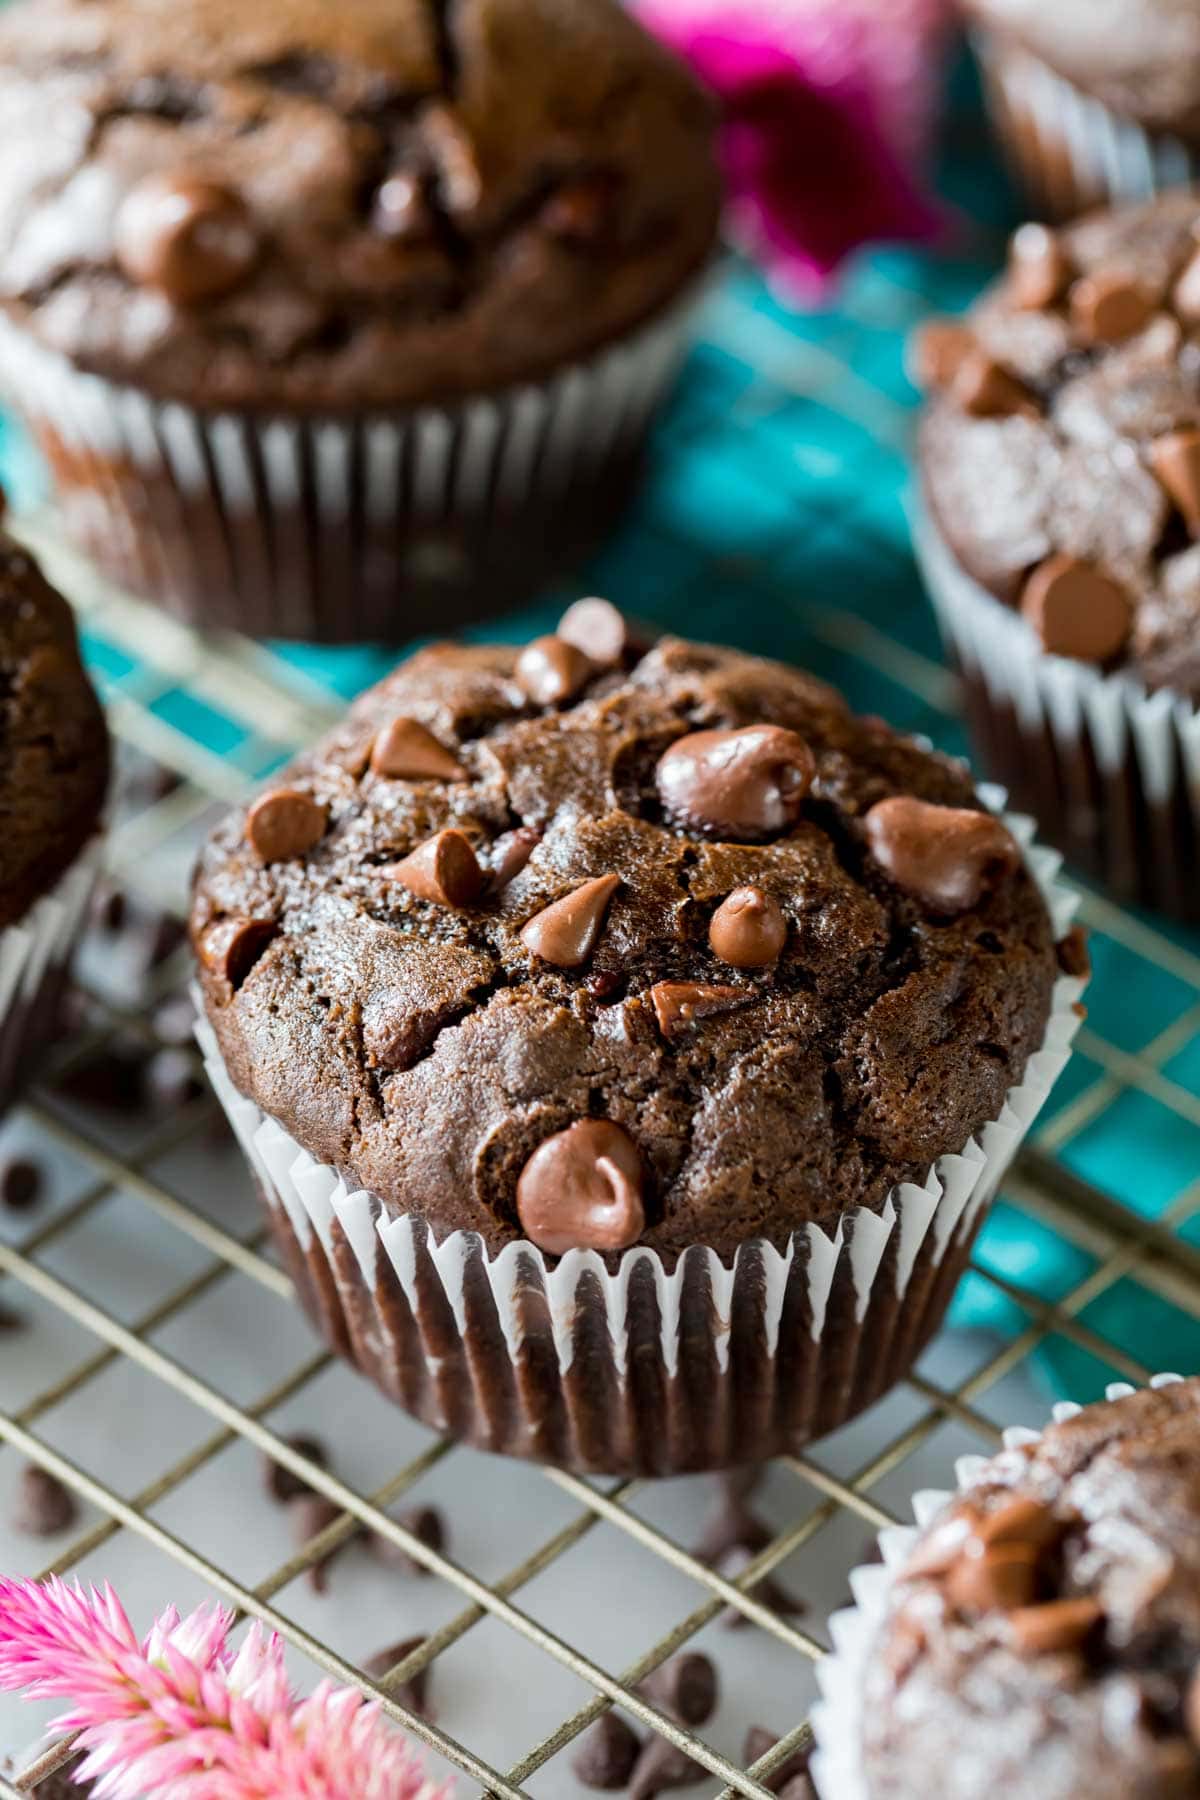 Close-up overhead view of a chocolate muffin with chocolate chips on a cooling rack.